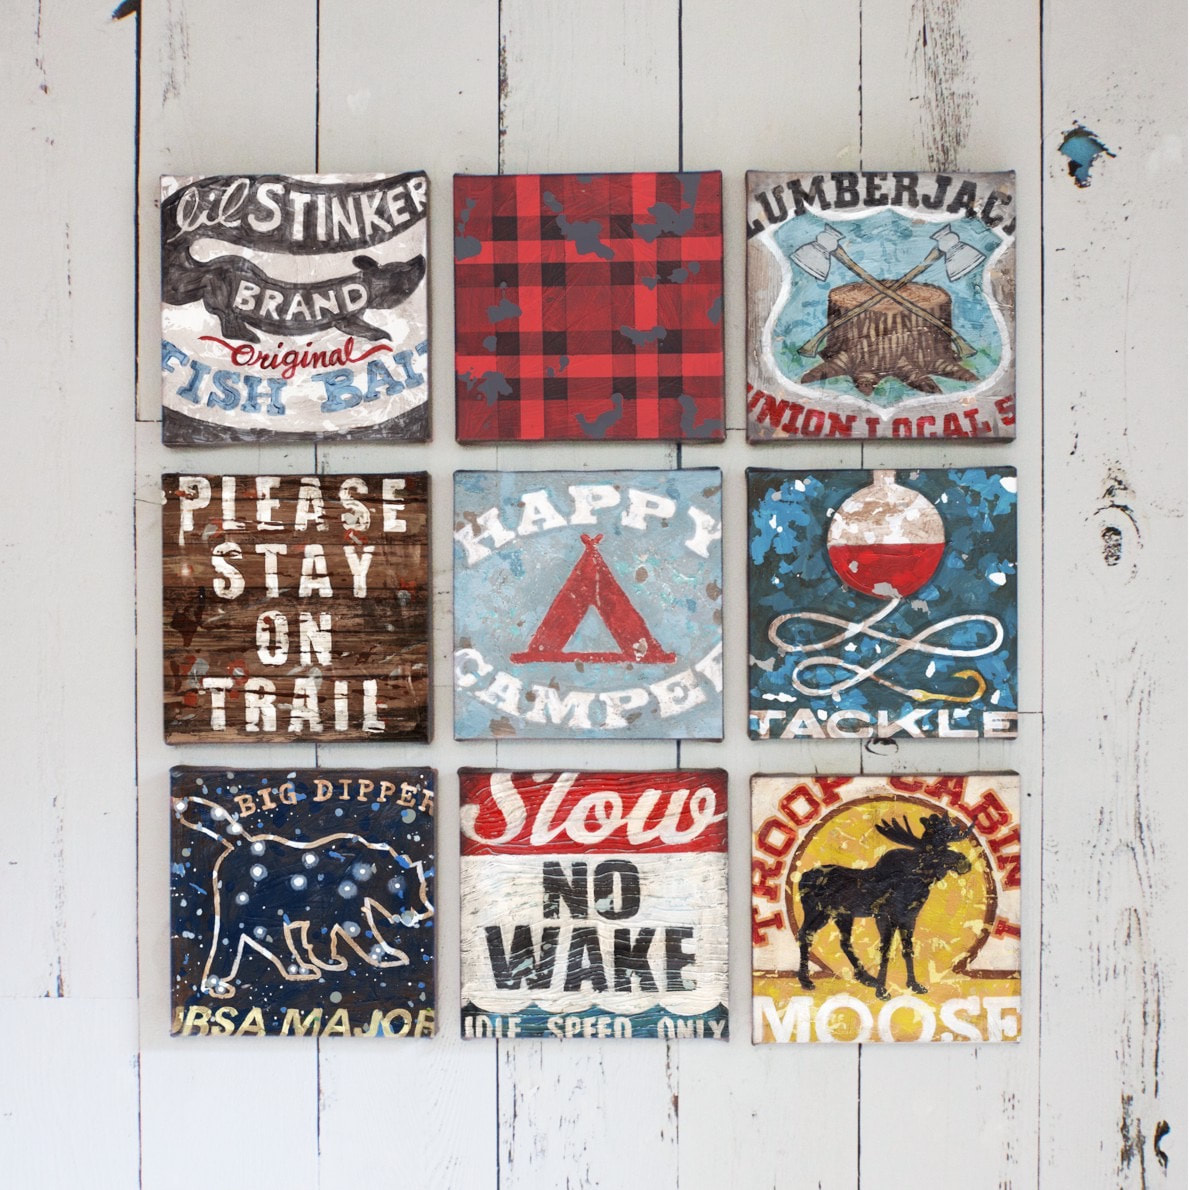 Ode' to the lumberjack trade. Perfect for boys rooms, teen spaces